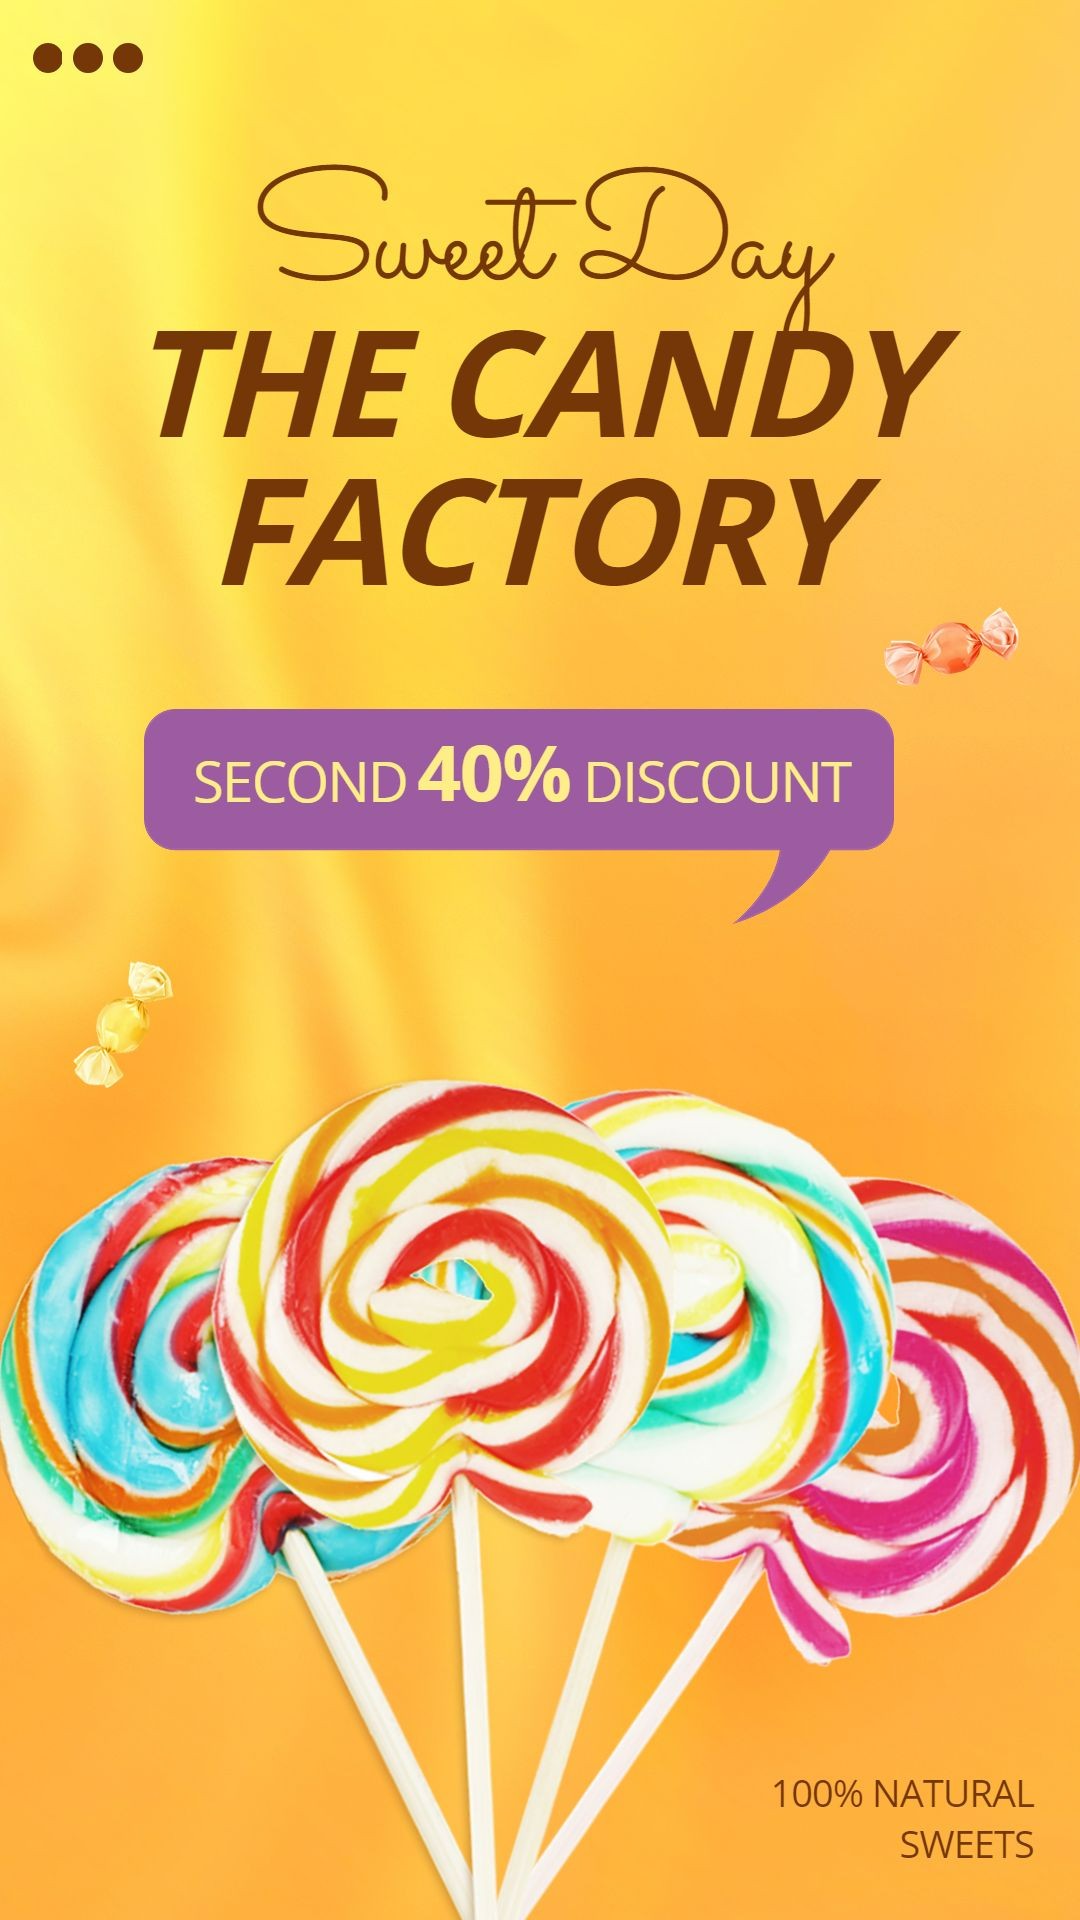 Candy Cane Consumer Packaged Fast Food Snacks Ecommerce Story预览效果